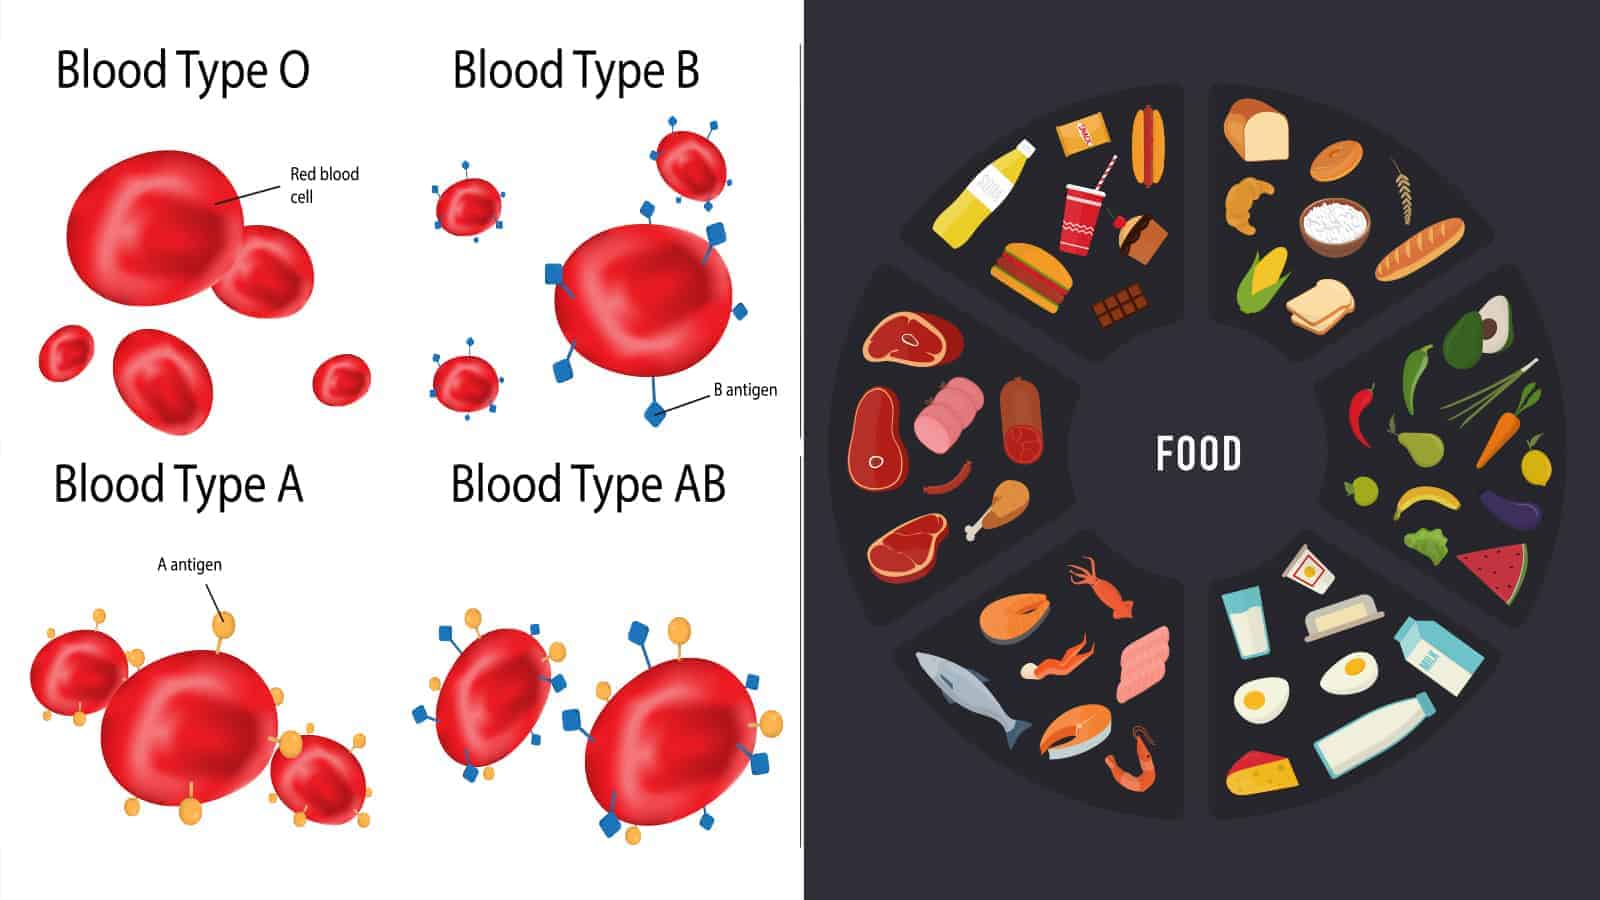 Science Explains What Foods to Eat, According to Your Blood Type